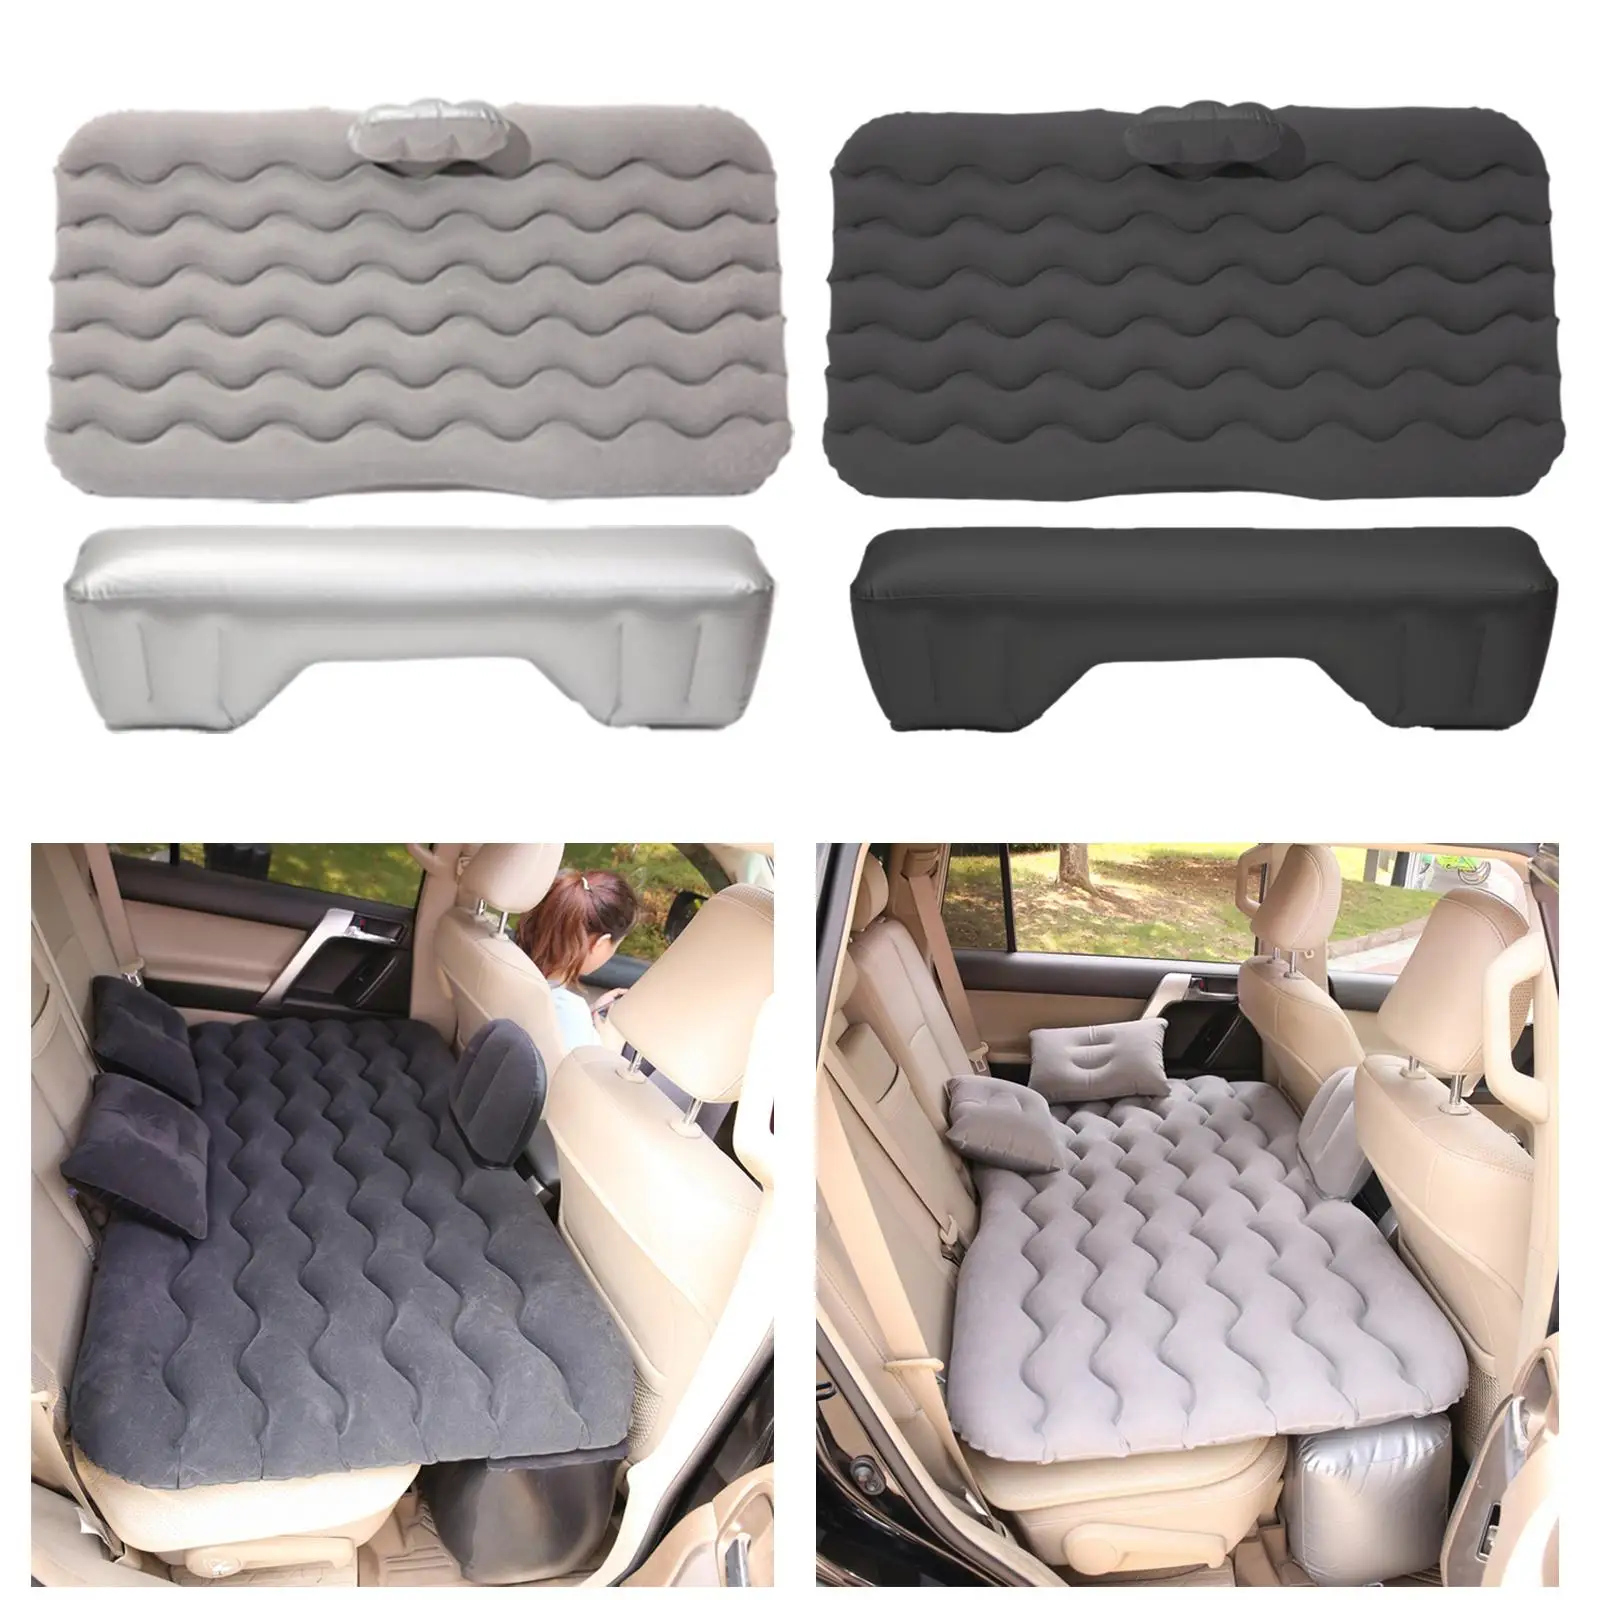 Back Seat Air Mattress Inflatable Rest Cushion Sleeping Bed for Going Out